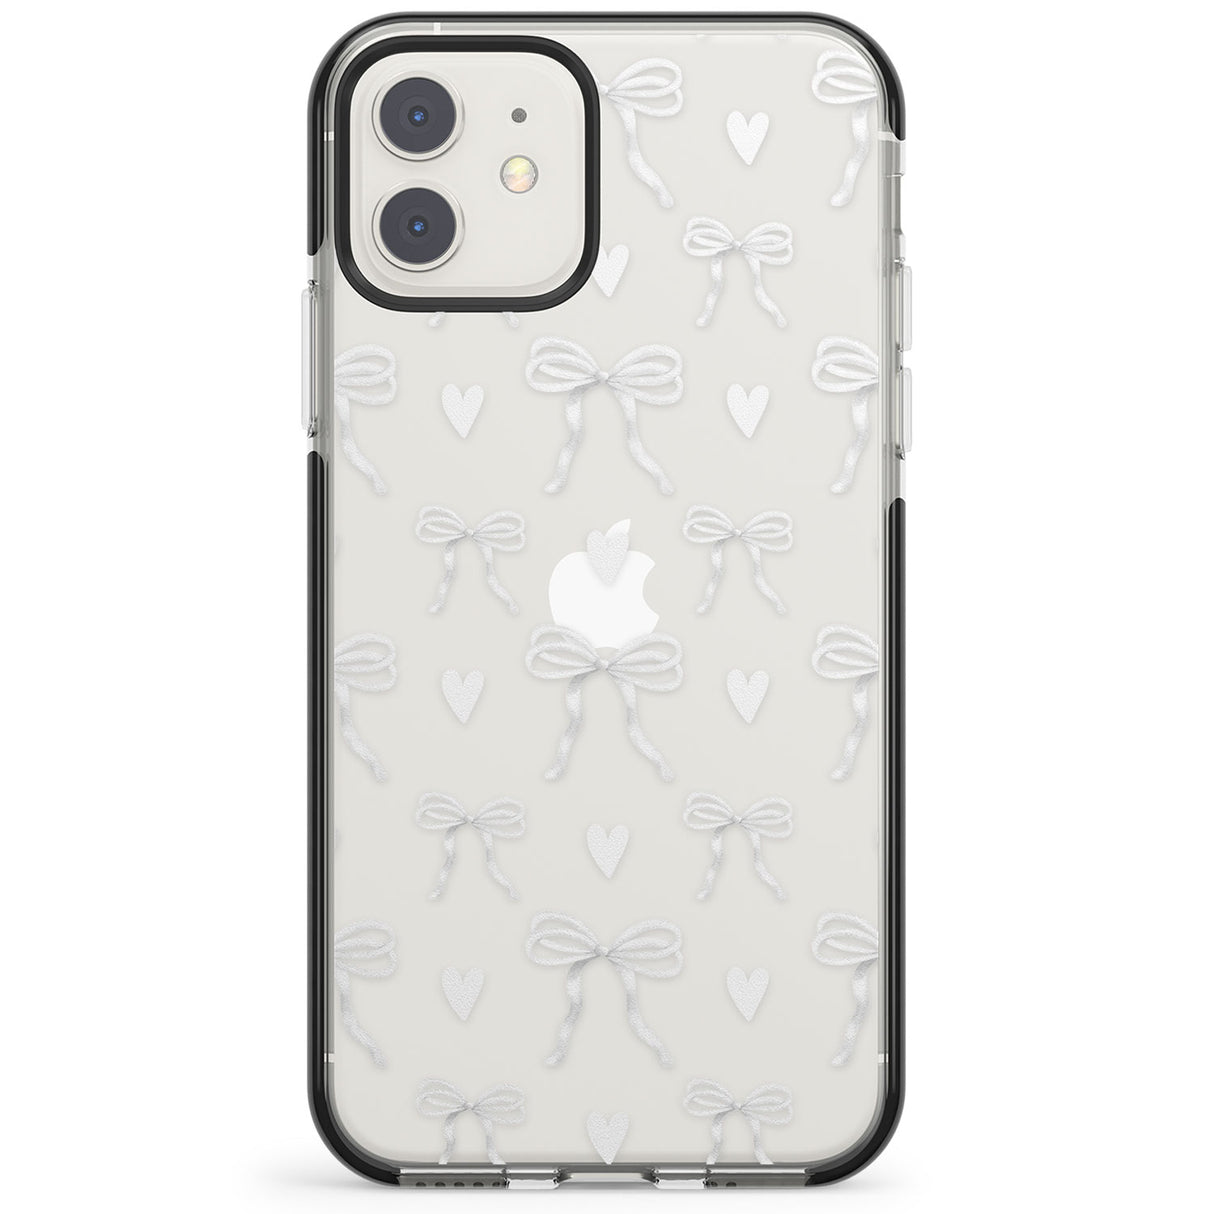 White Bows & Hearts Impact Phone Case for iPhone 11, iphone 12